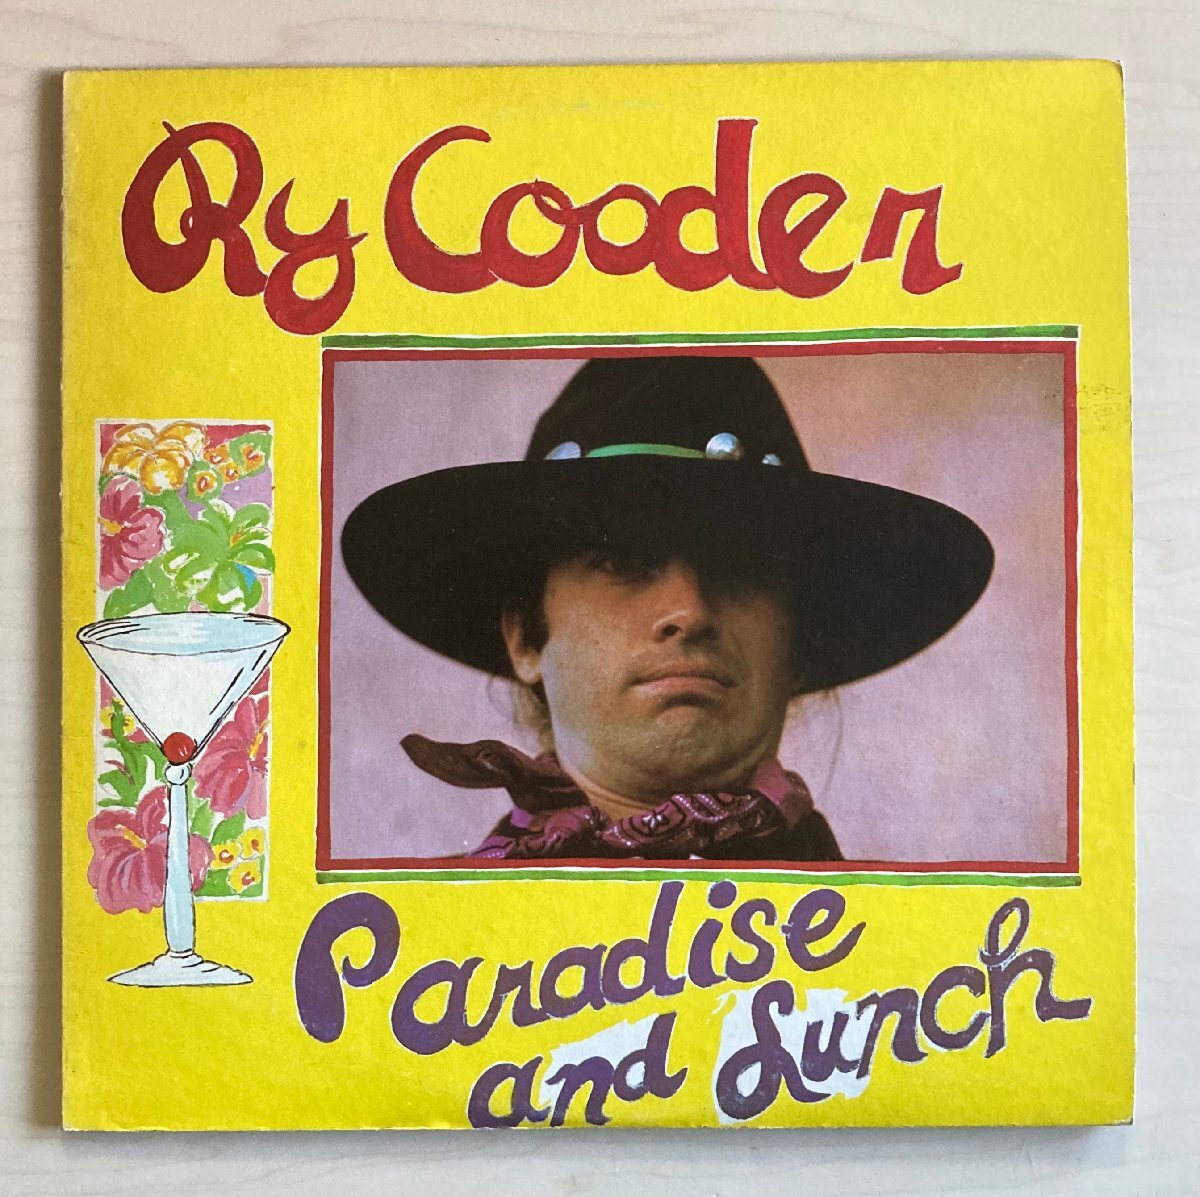 LPA23087 ライ・クーダー RY COODER / PARADISE AND LUNCH 輸入盤LP 盤良好 USA_画像1